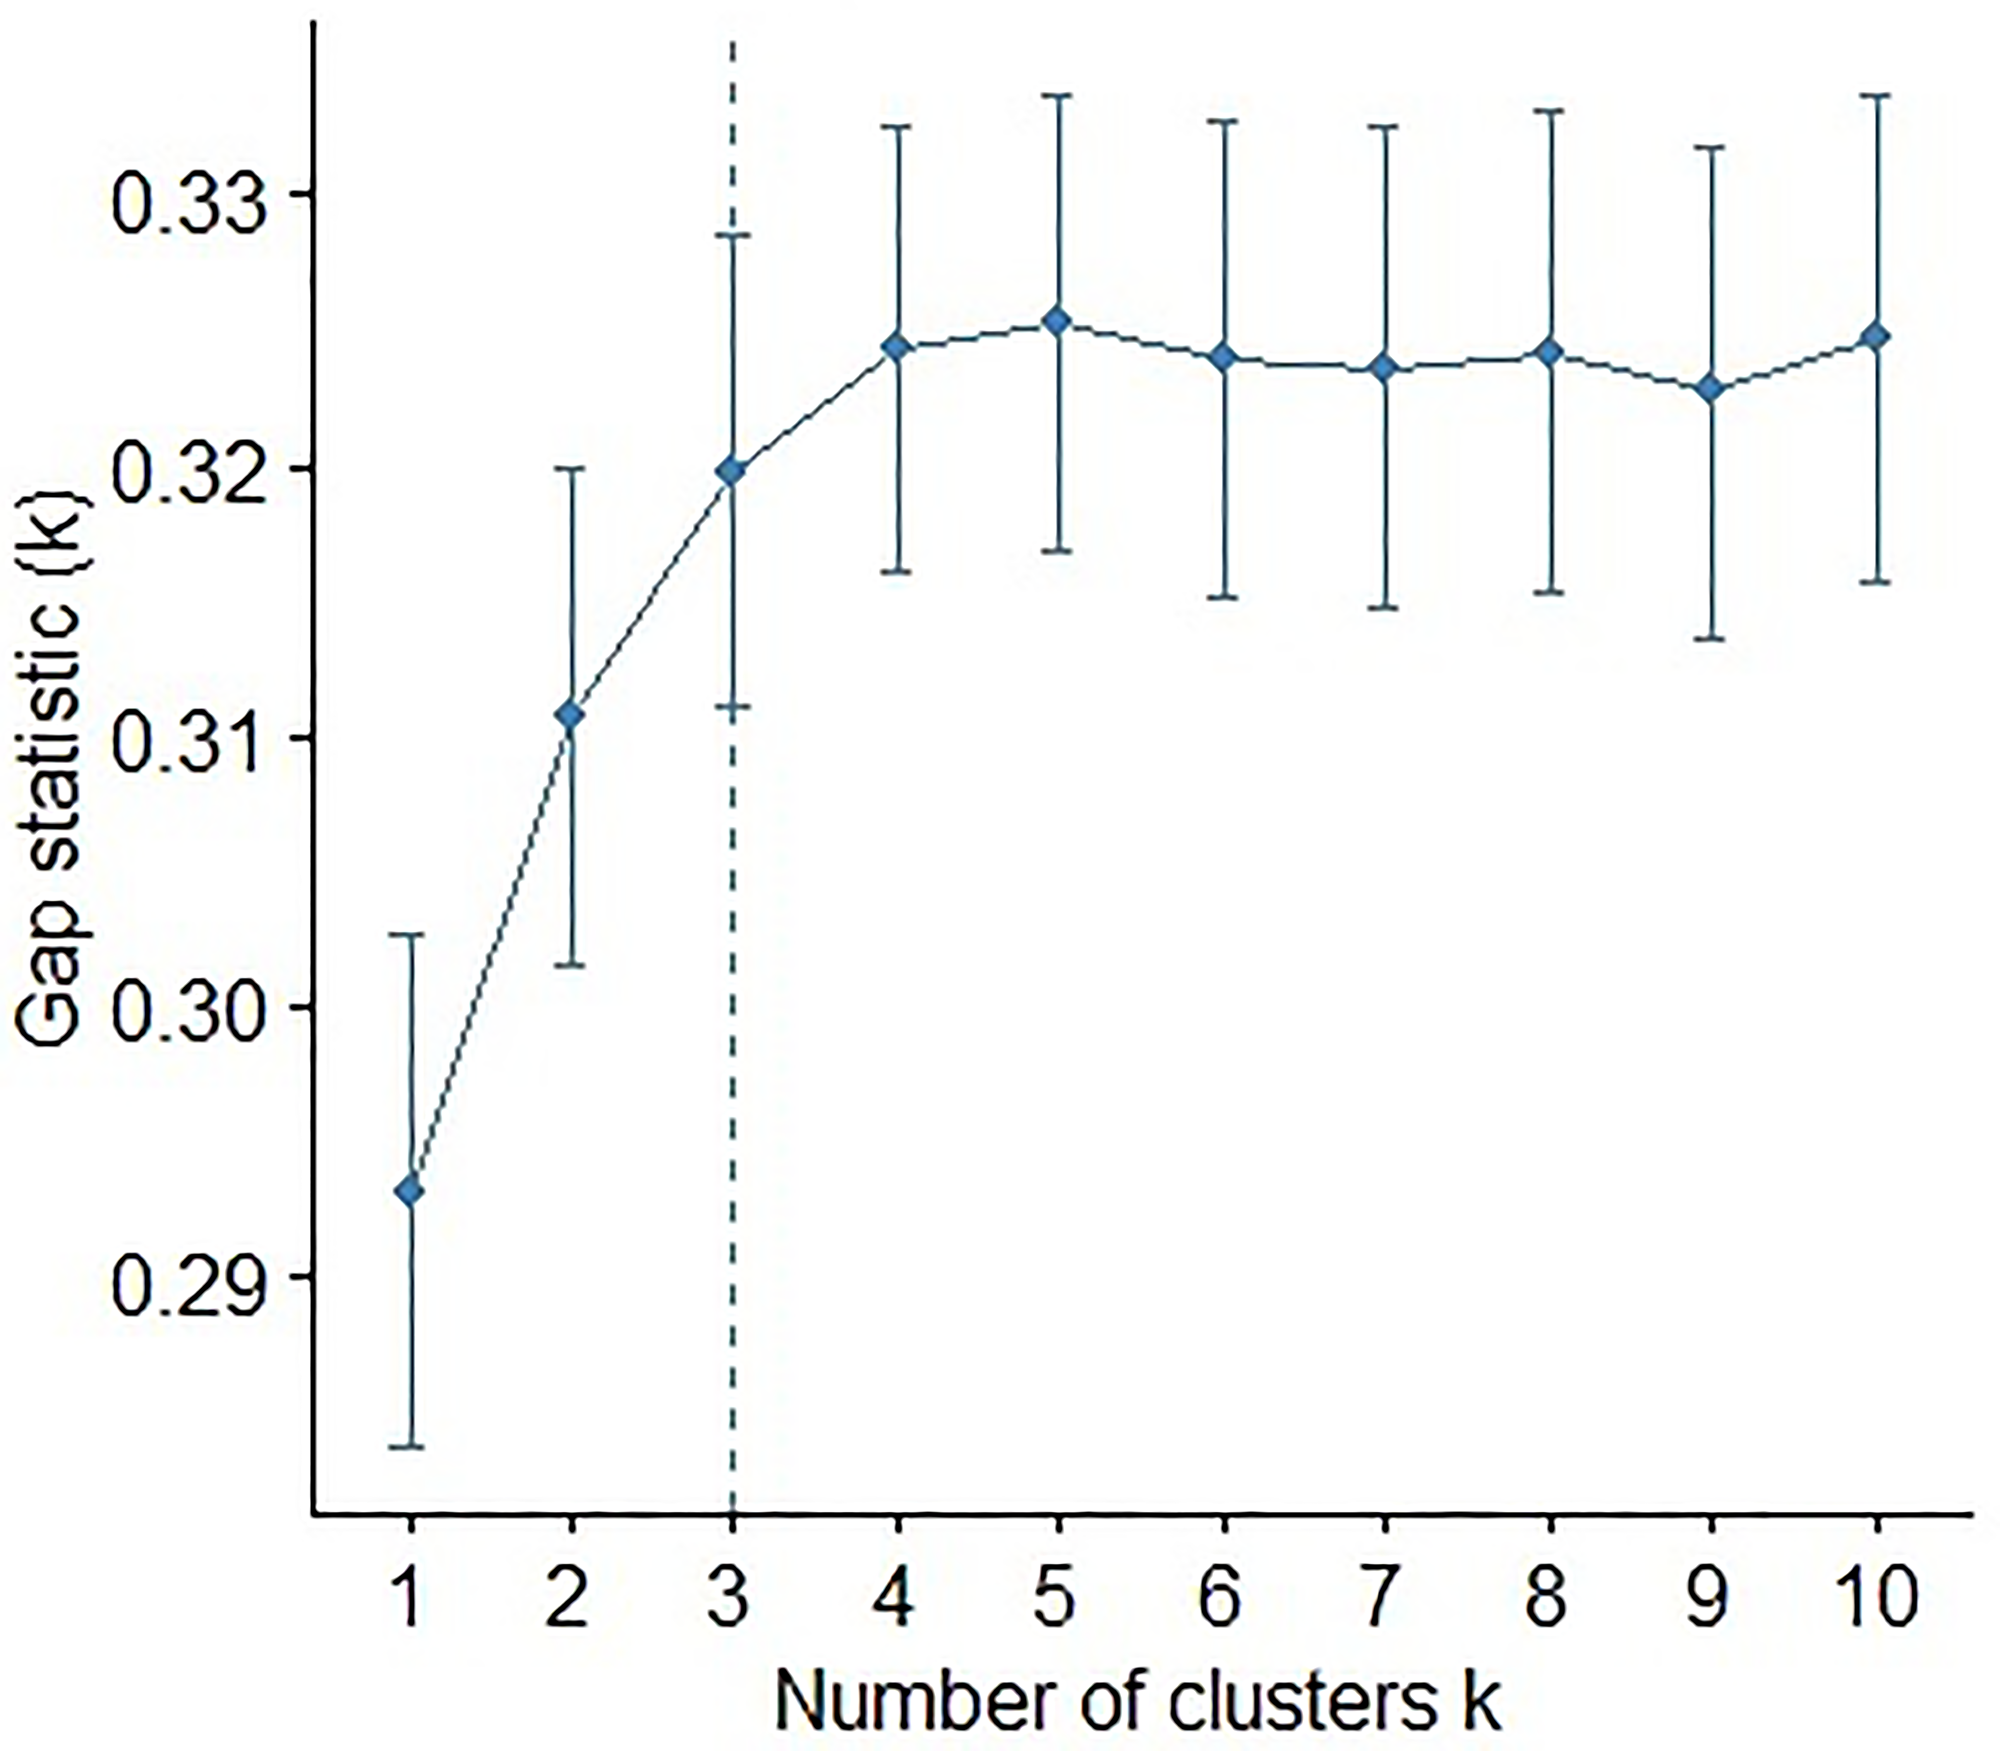 Figure 9: Plot of the gap statistic against the number of clusters in an unsupervised k-means clustering of the miRNAs.